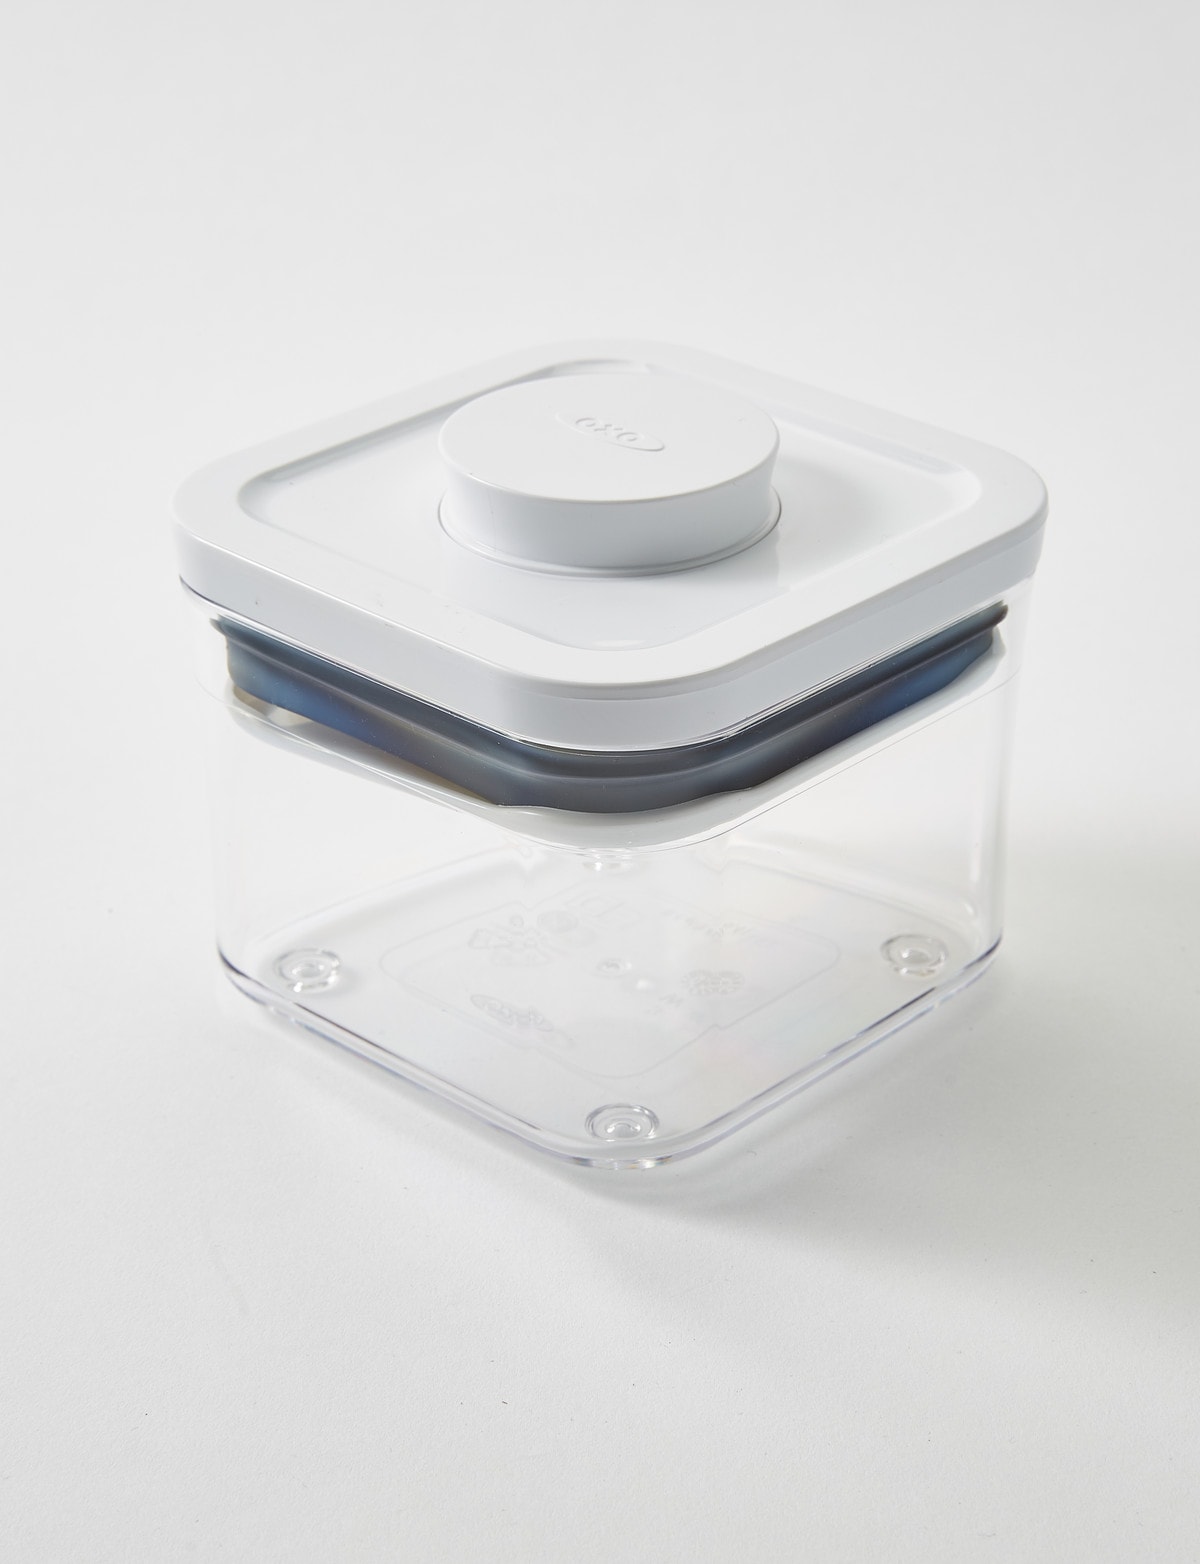 Oxo Good Grips POP Container - Small Square Mini